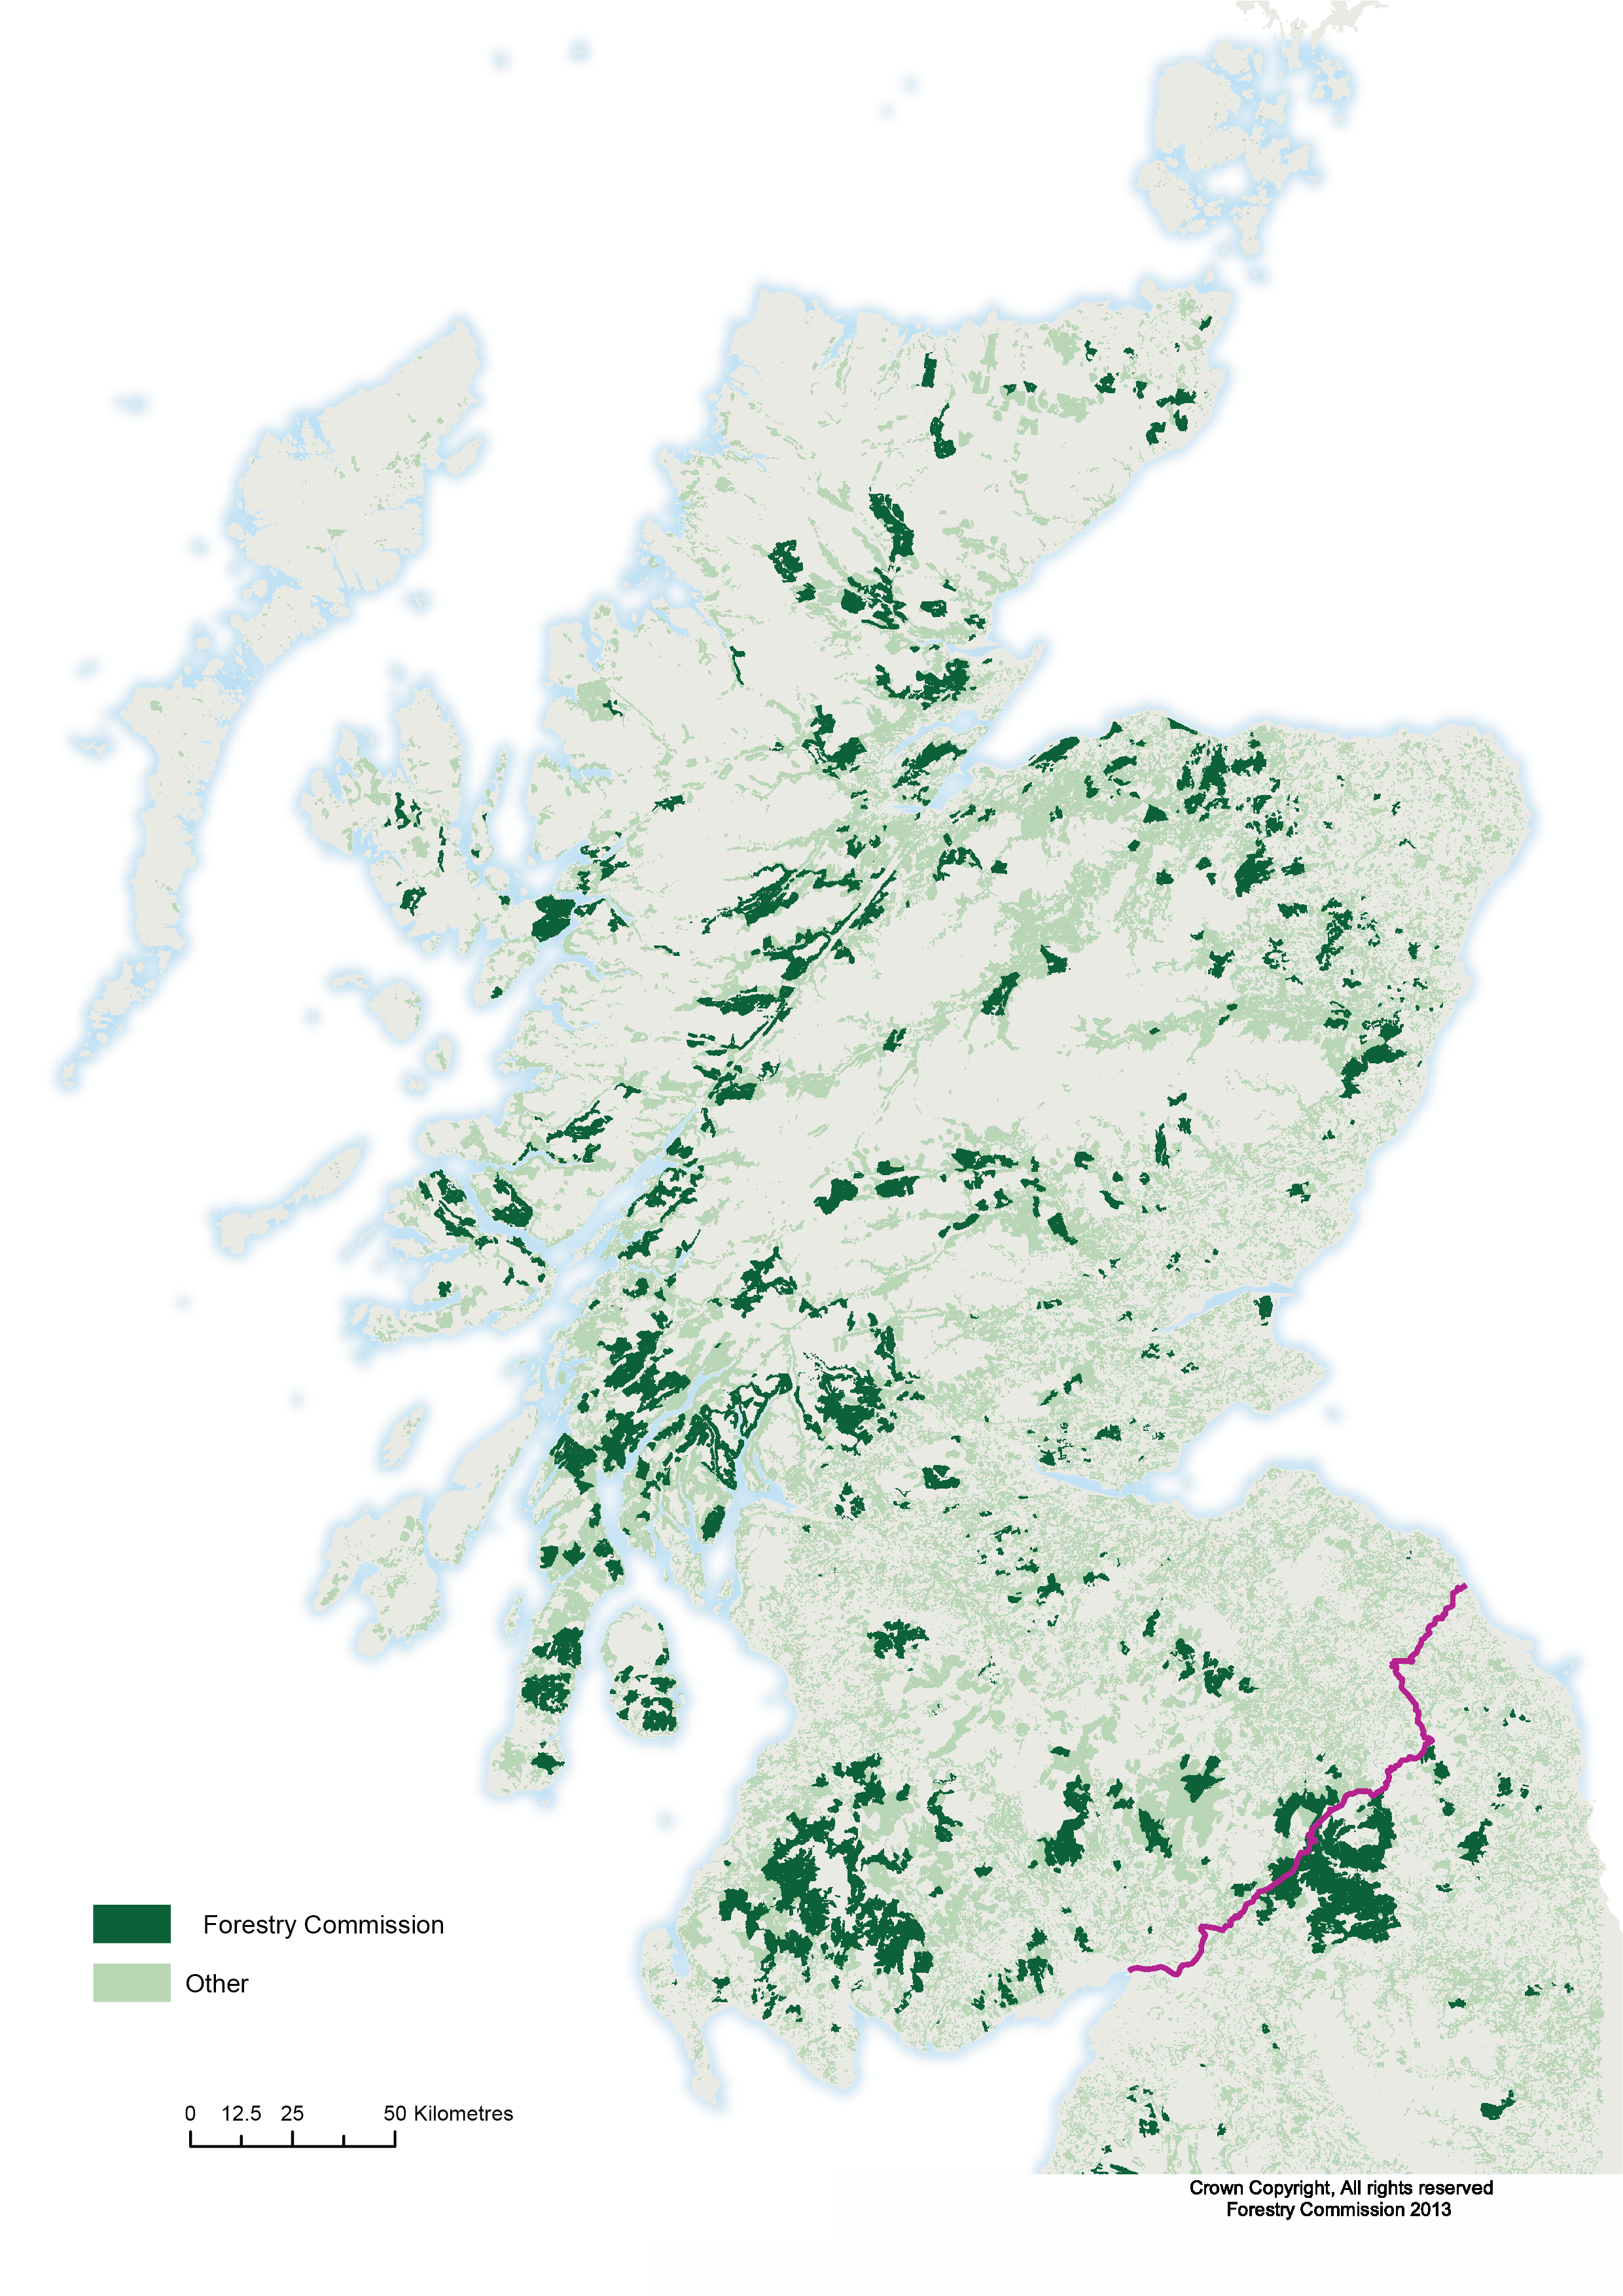 The majority of Scotland's woodlands are privately owned